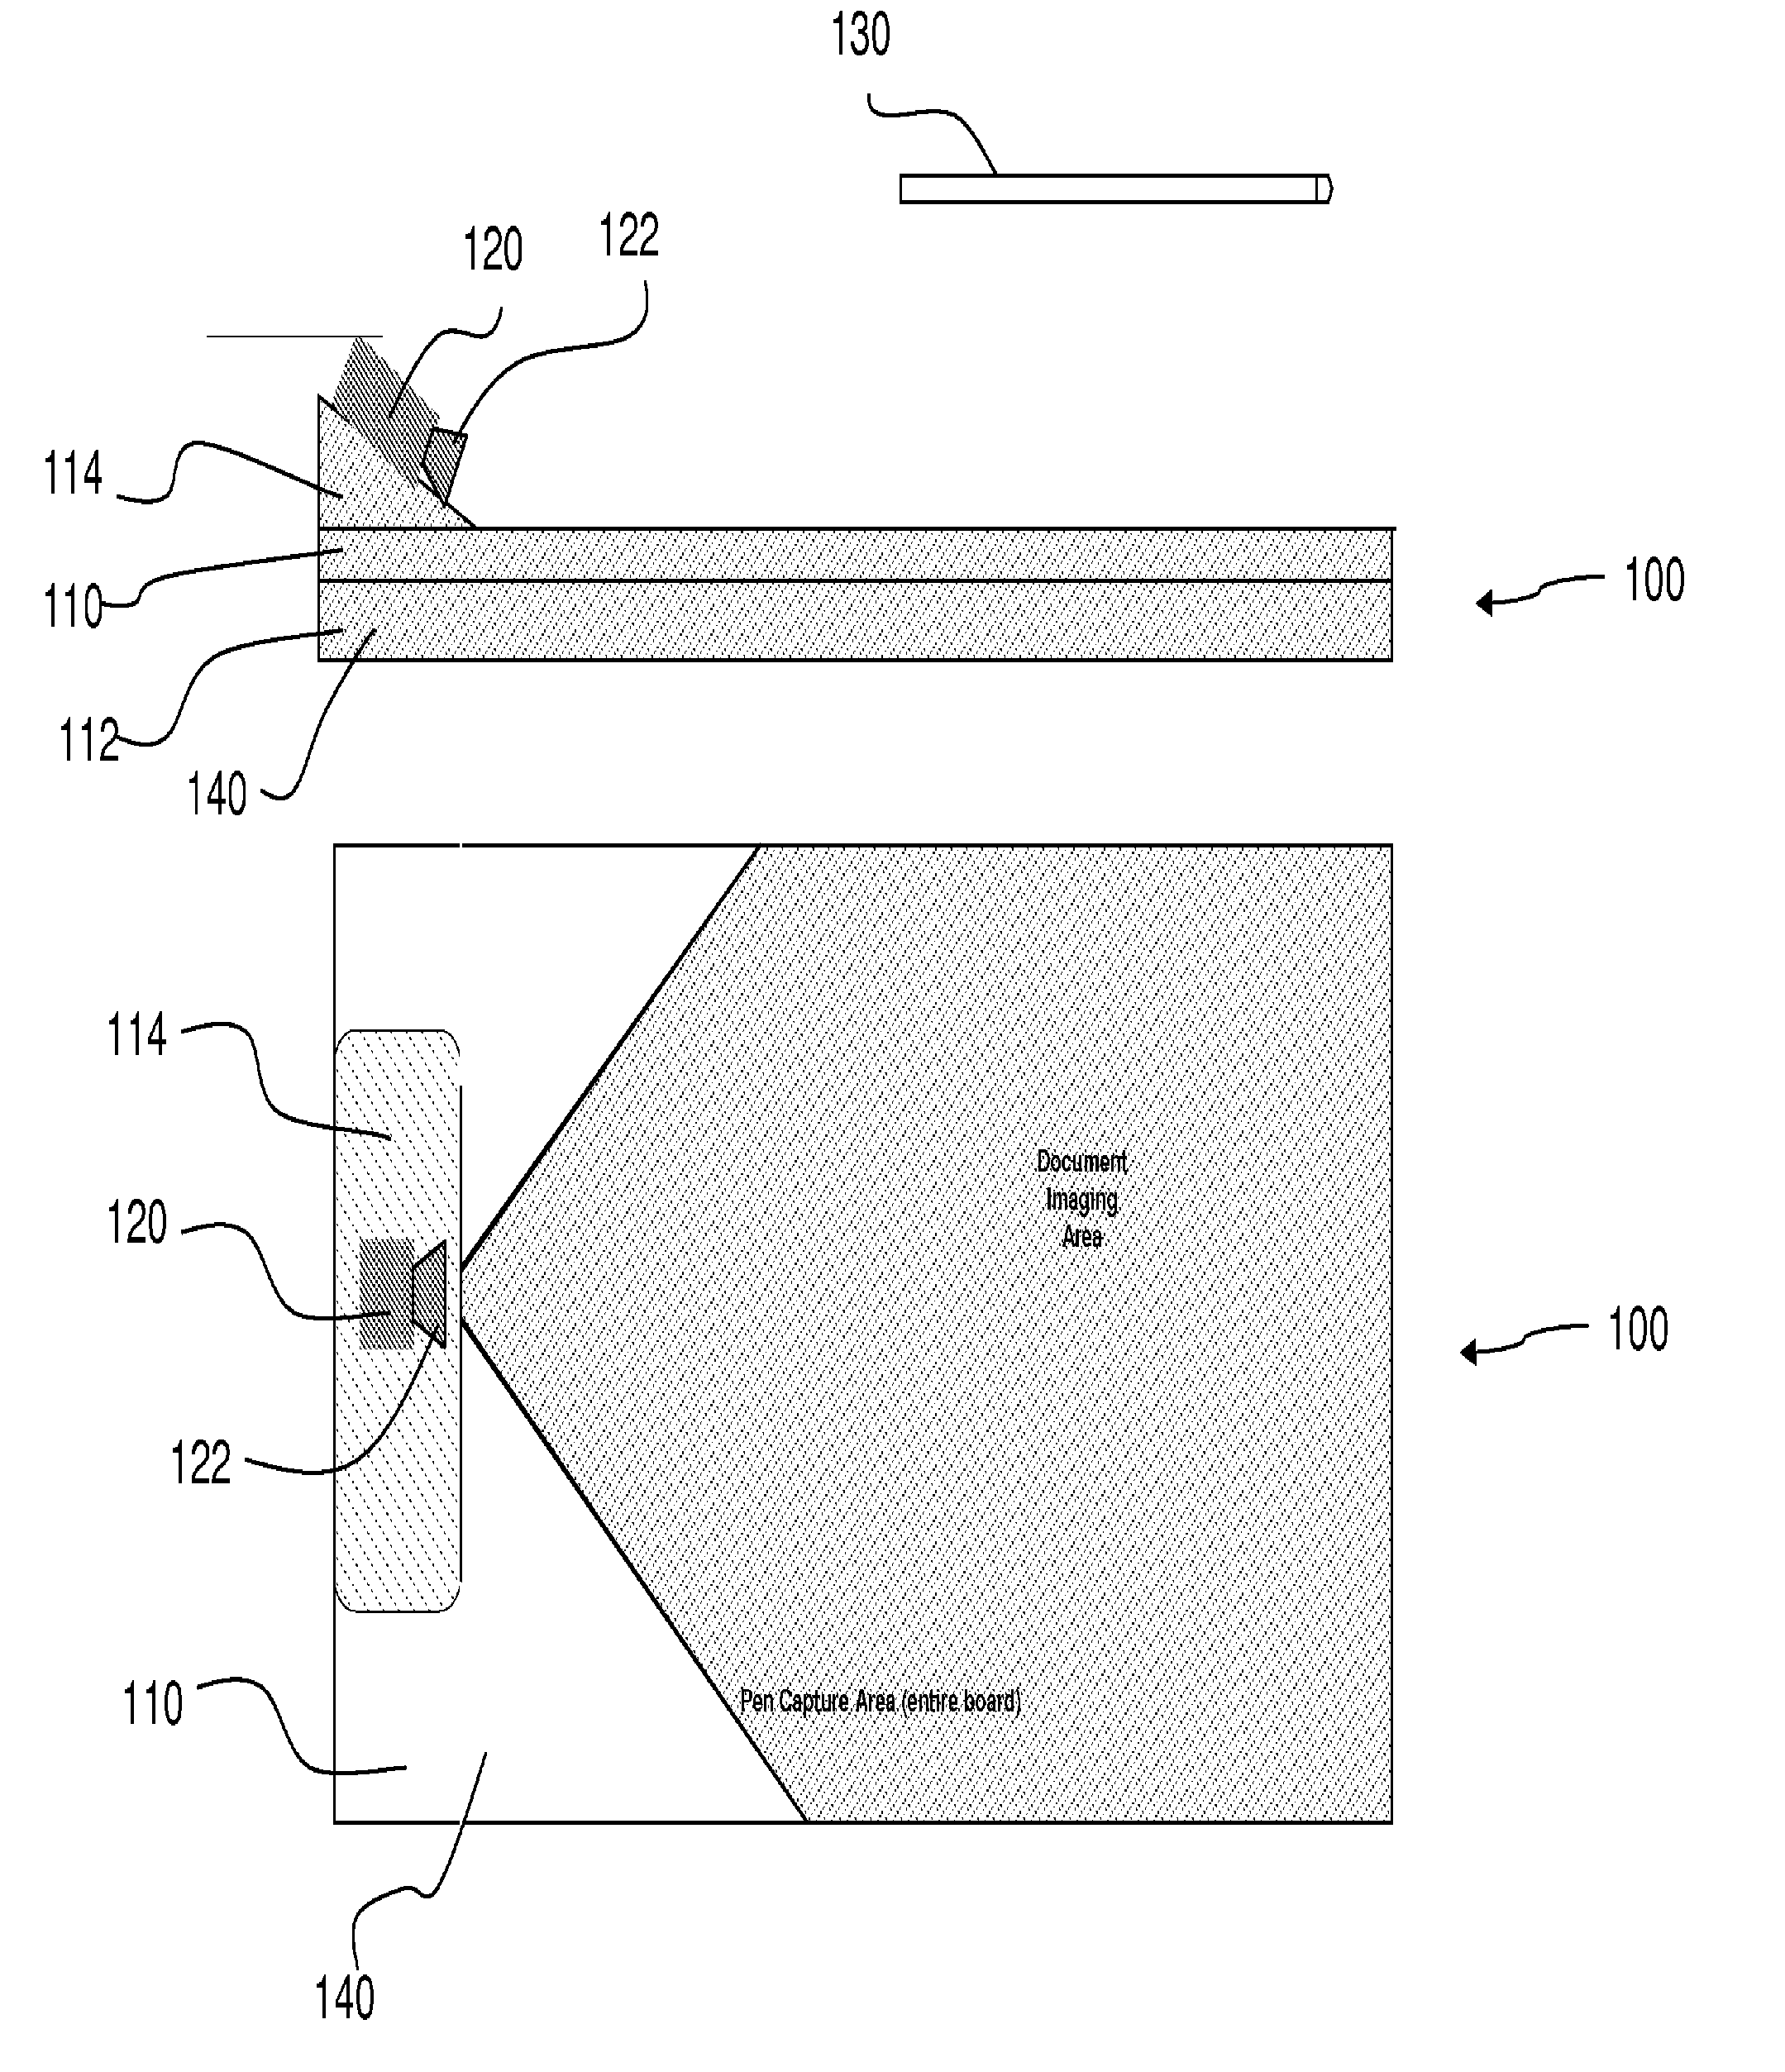 Camera-equipped writing tablet apparatus for digitizing form entries